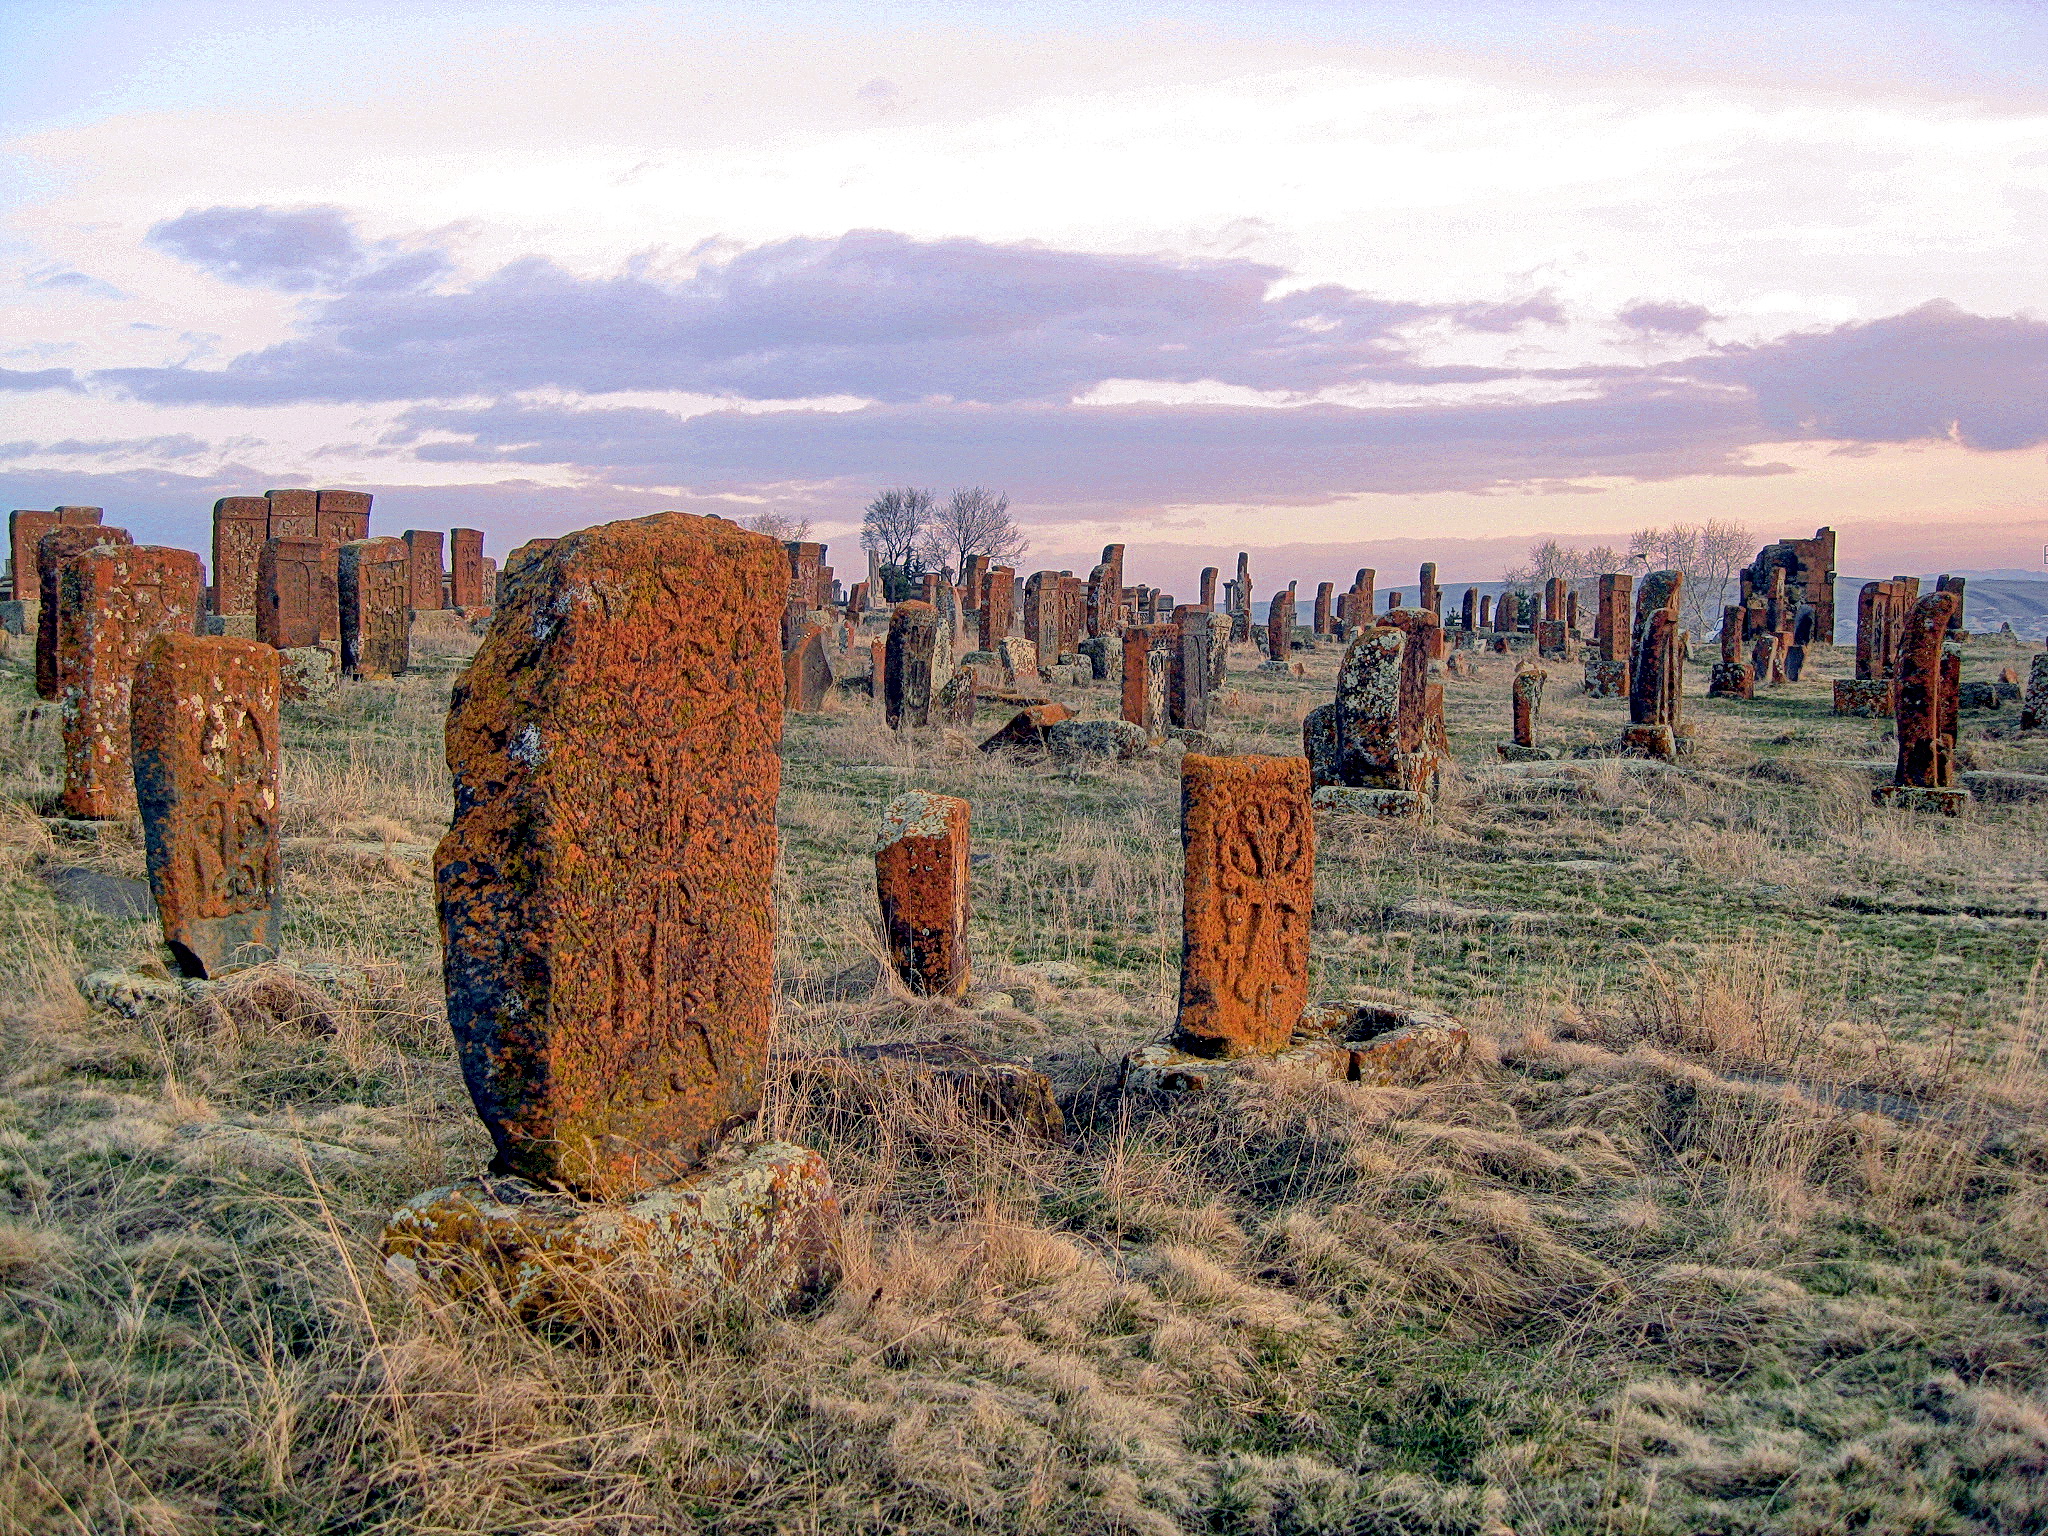 The Noratus cemetery, the earliest works of which date back almost a thousand years